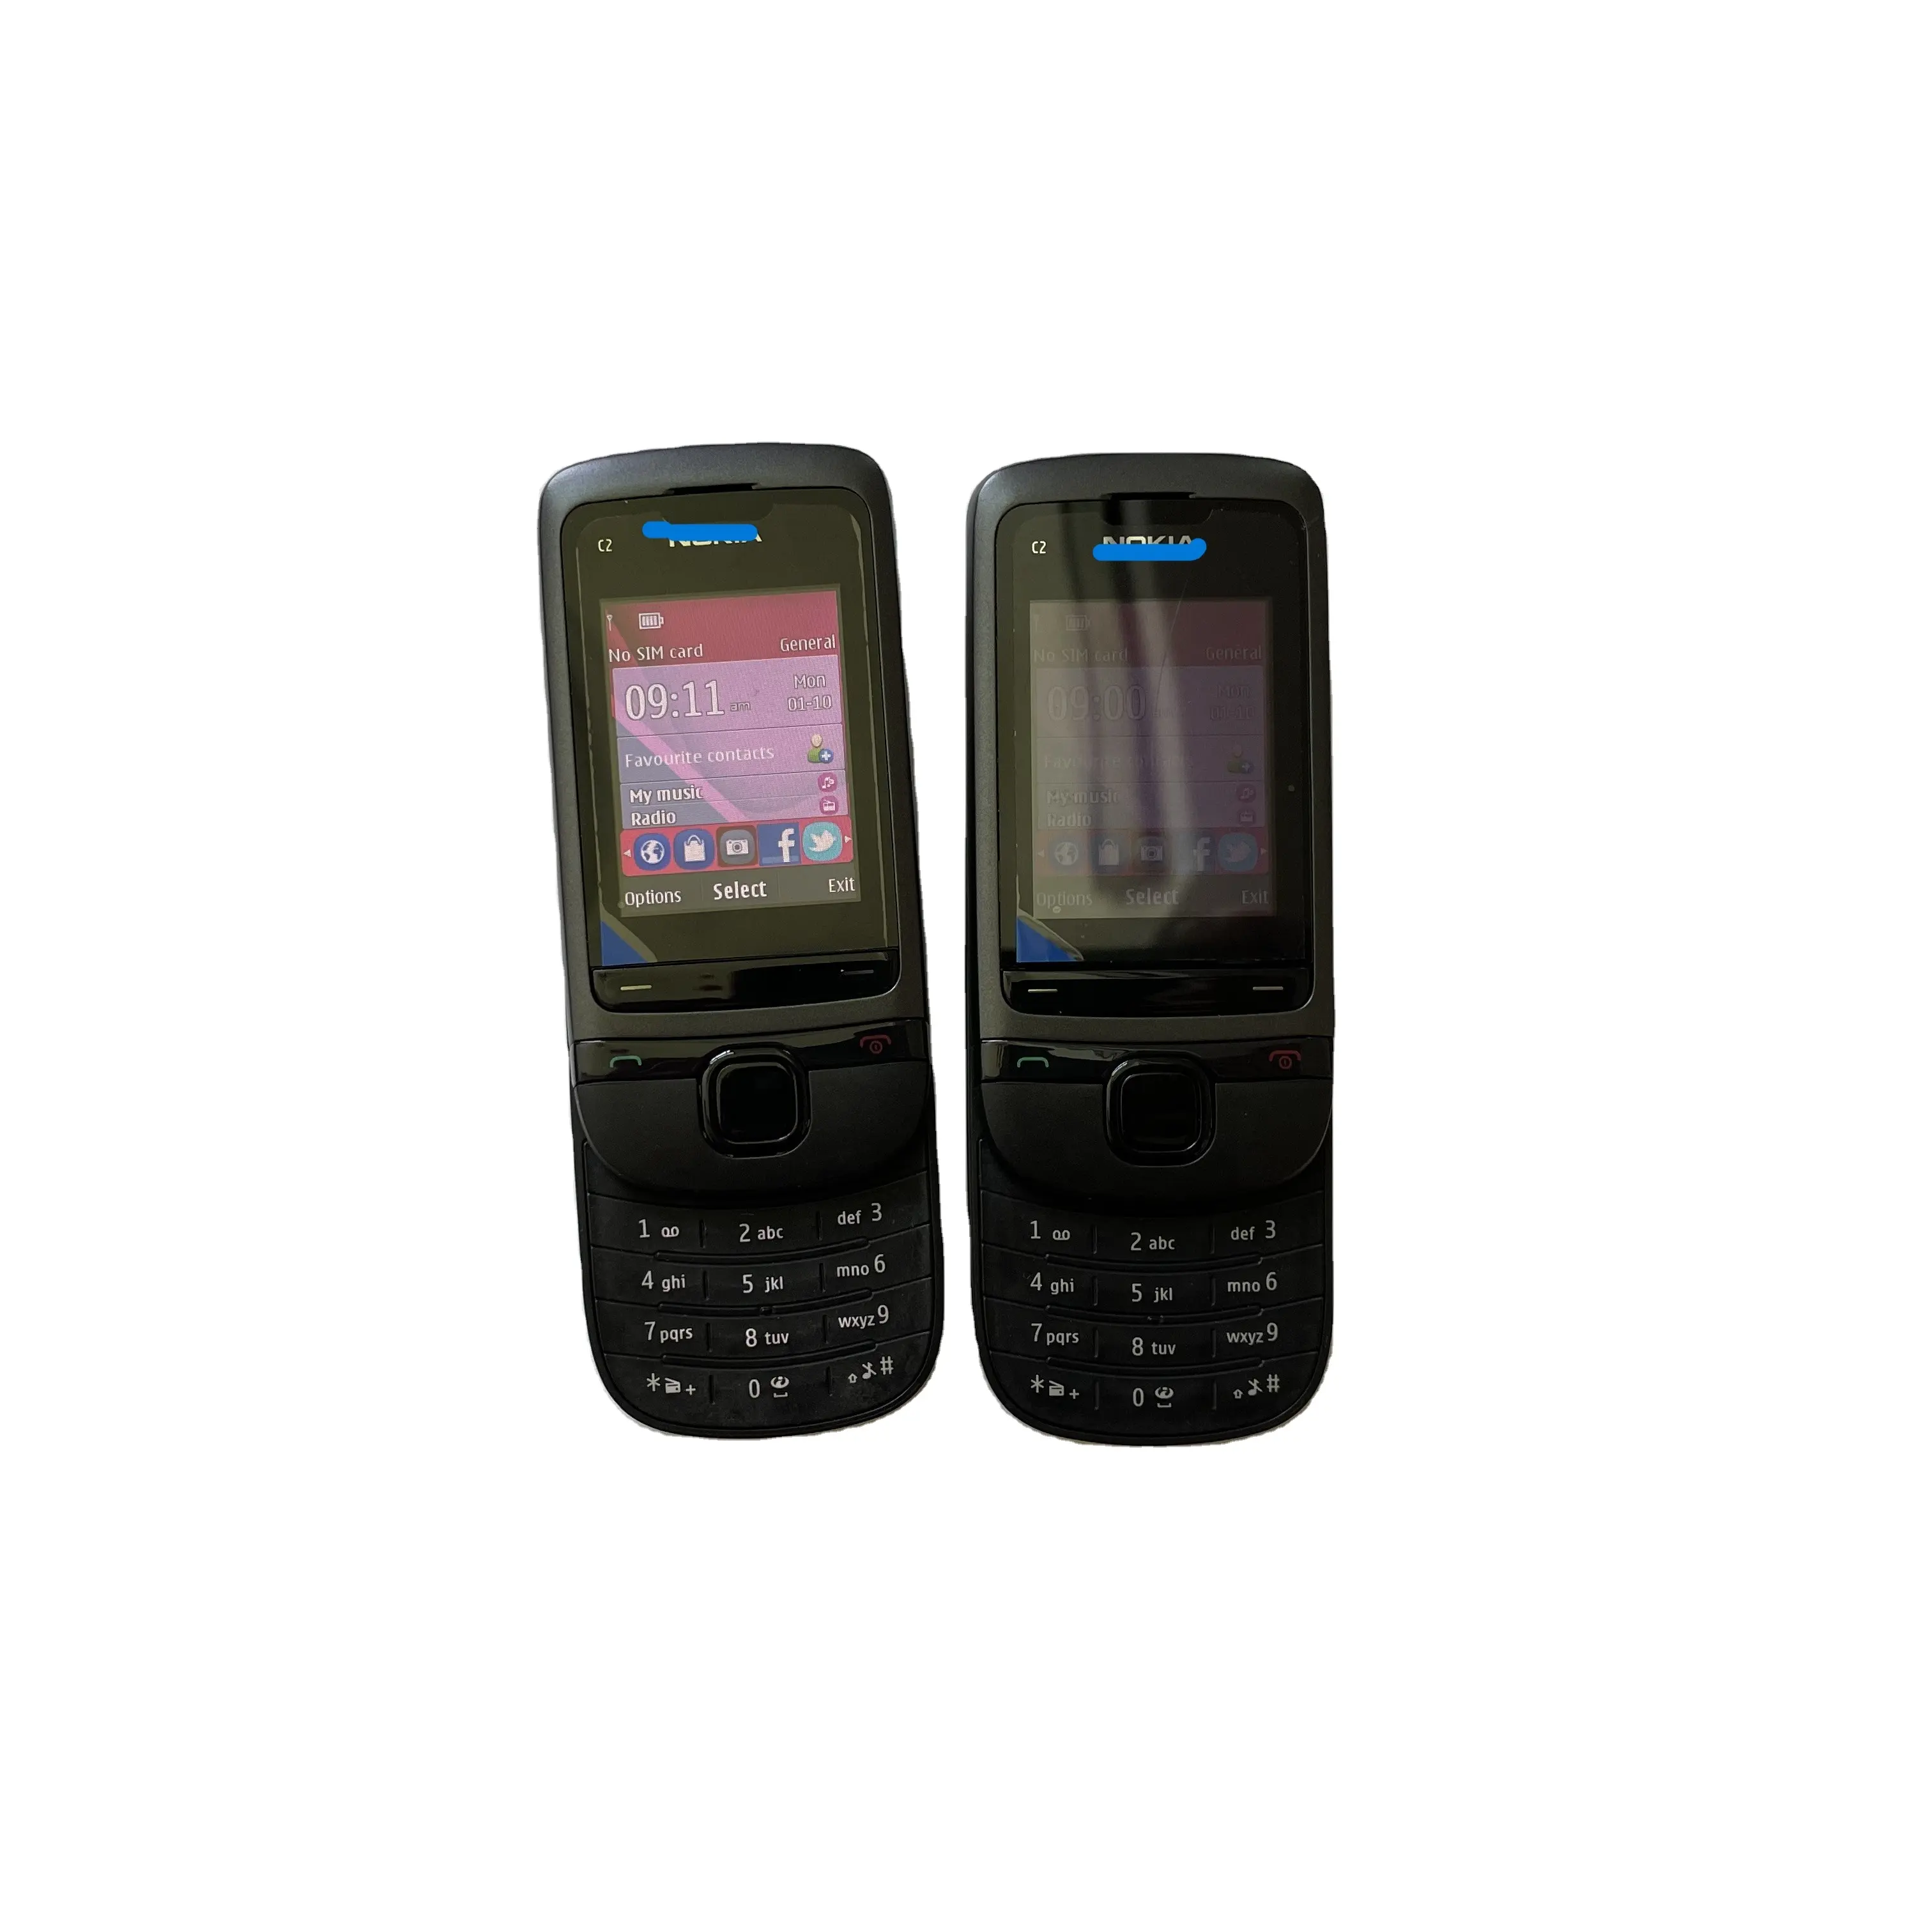 Hot Selling second hand mobile phones cheap used mobile phone For nokia 105 106 c2-05 used Cell Phone